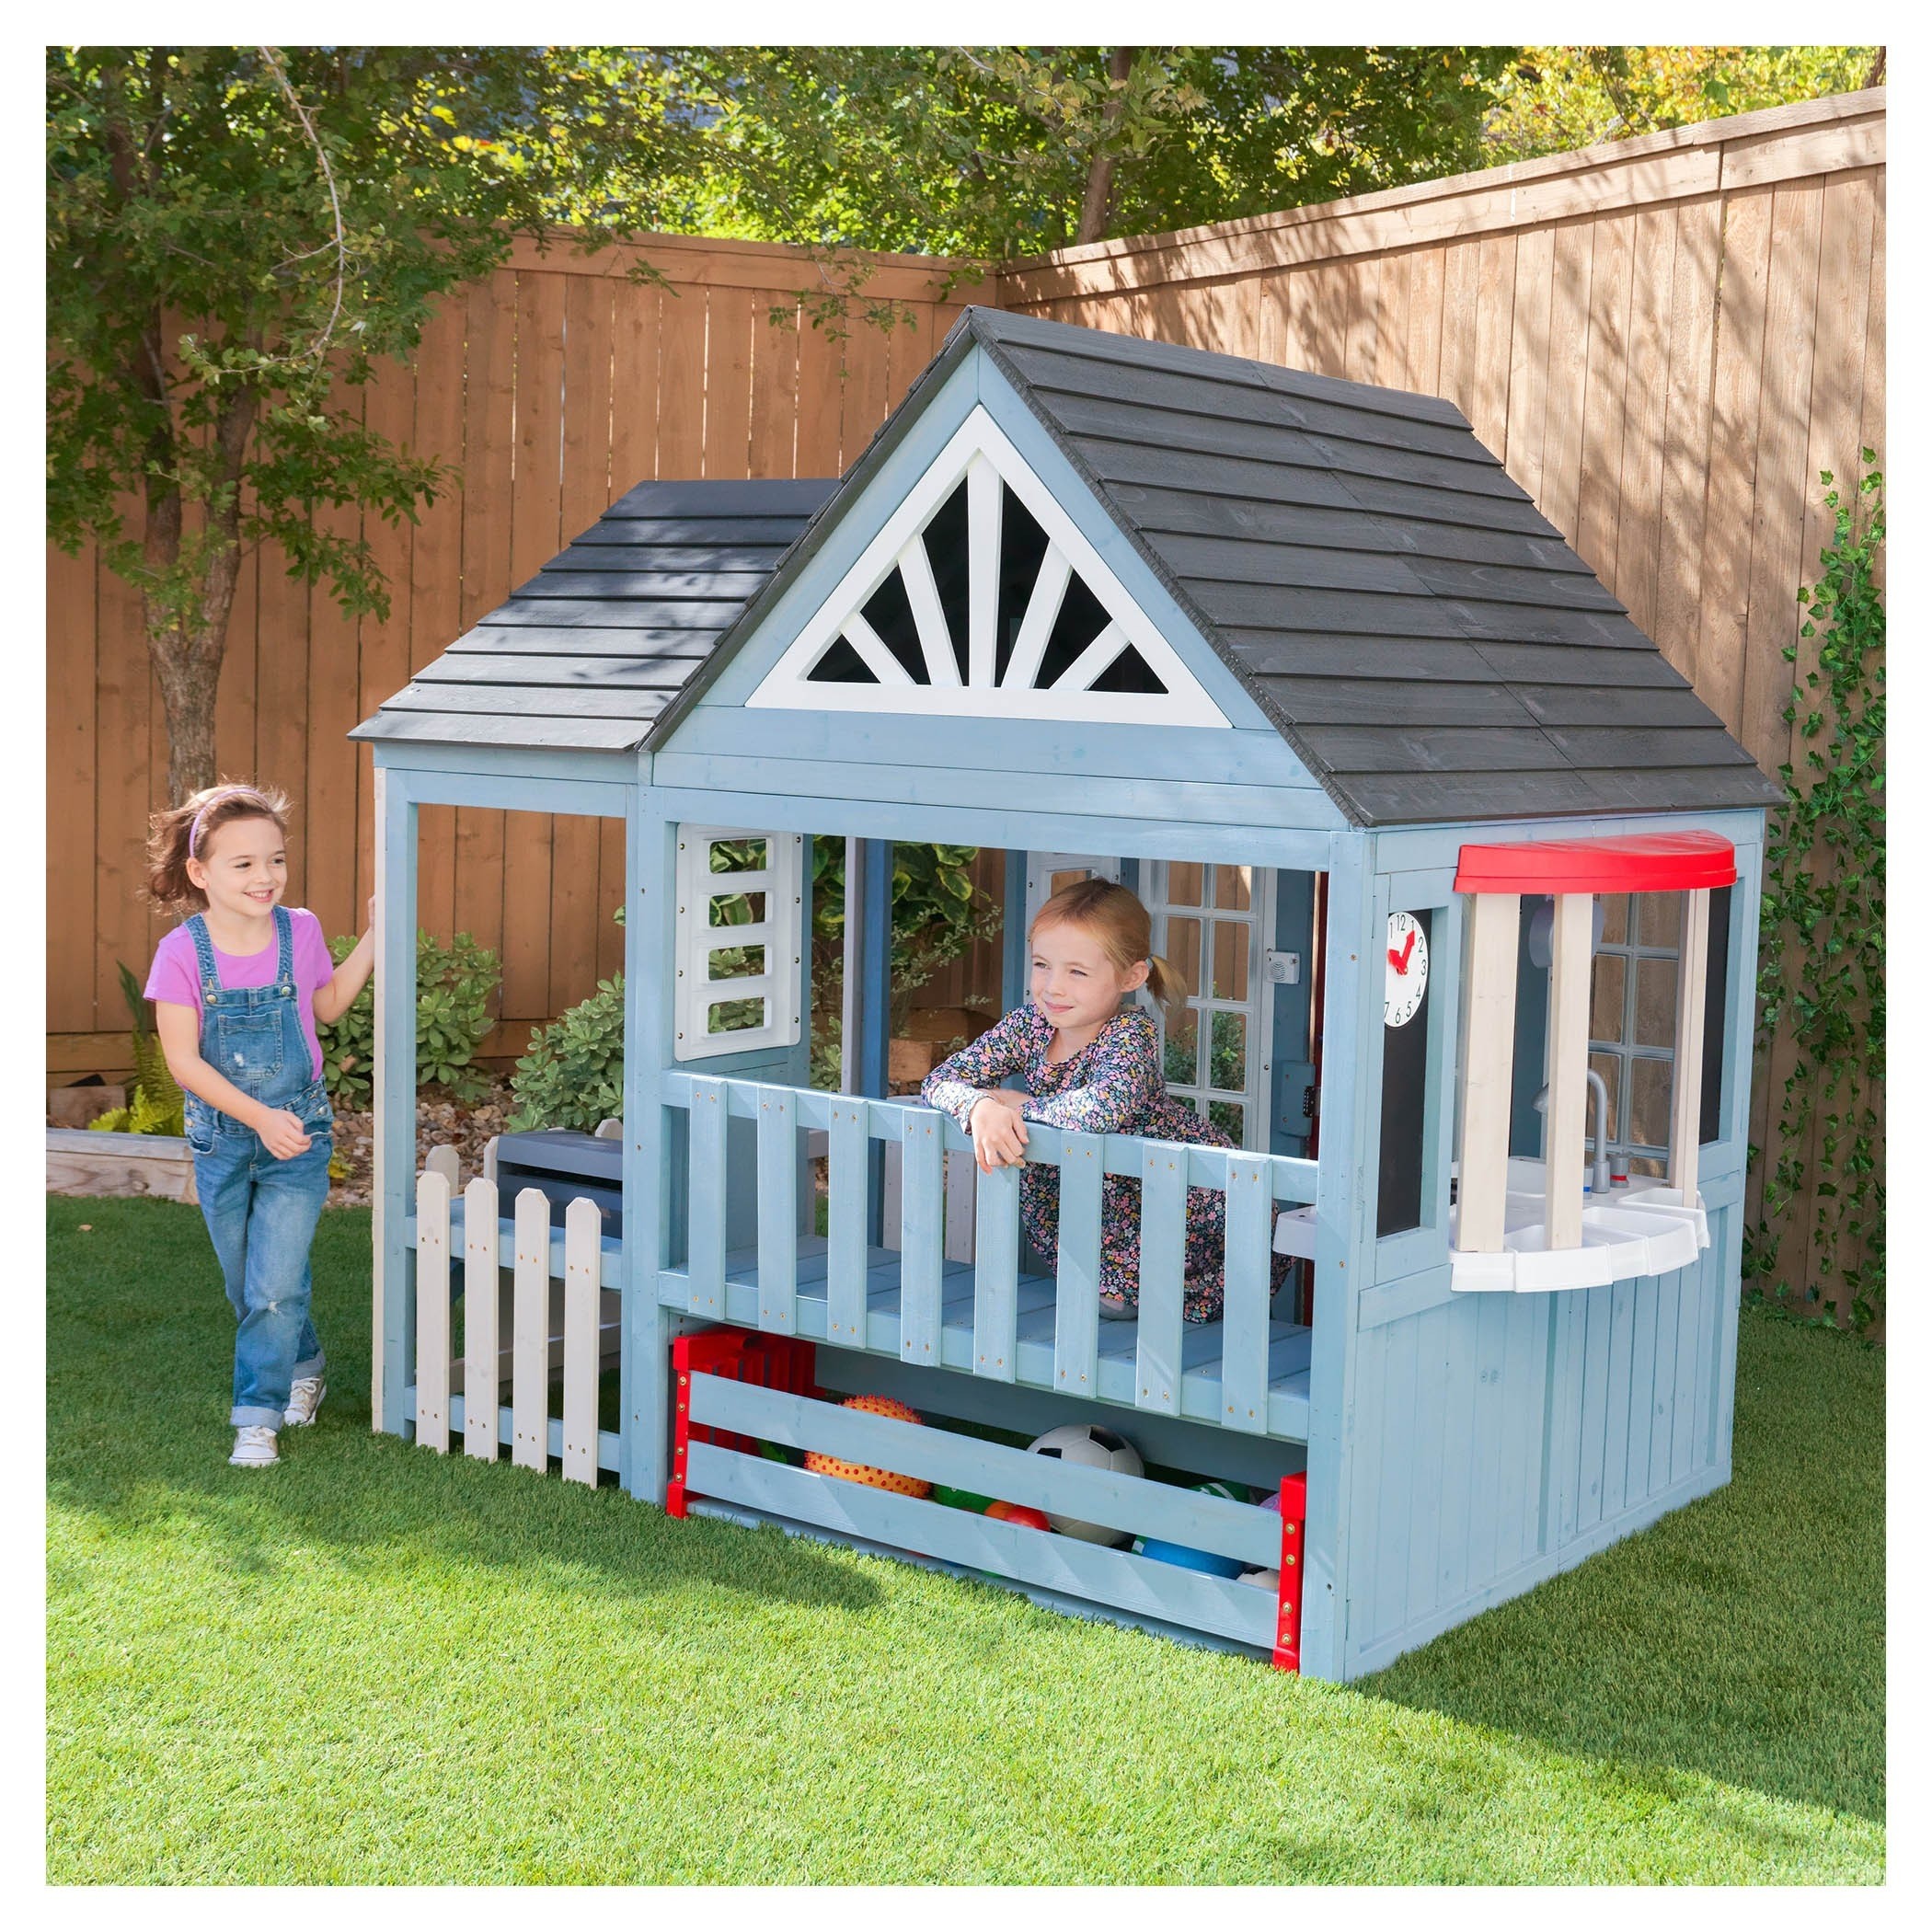 Playhouse plans childrens wooden playhouse designs at